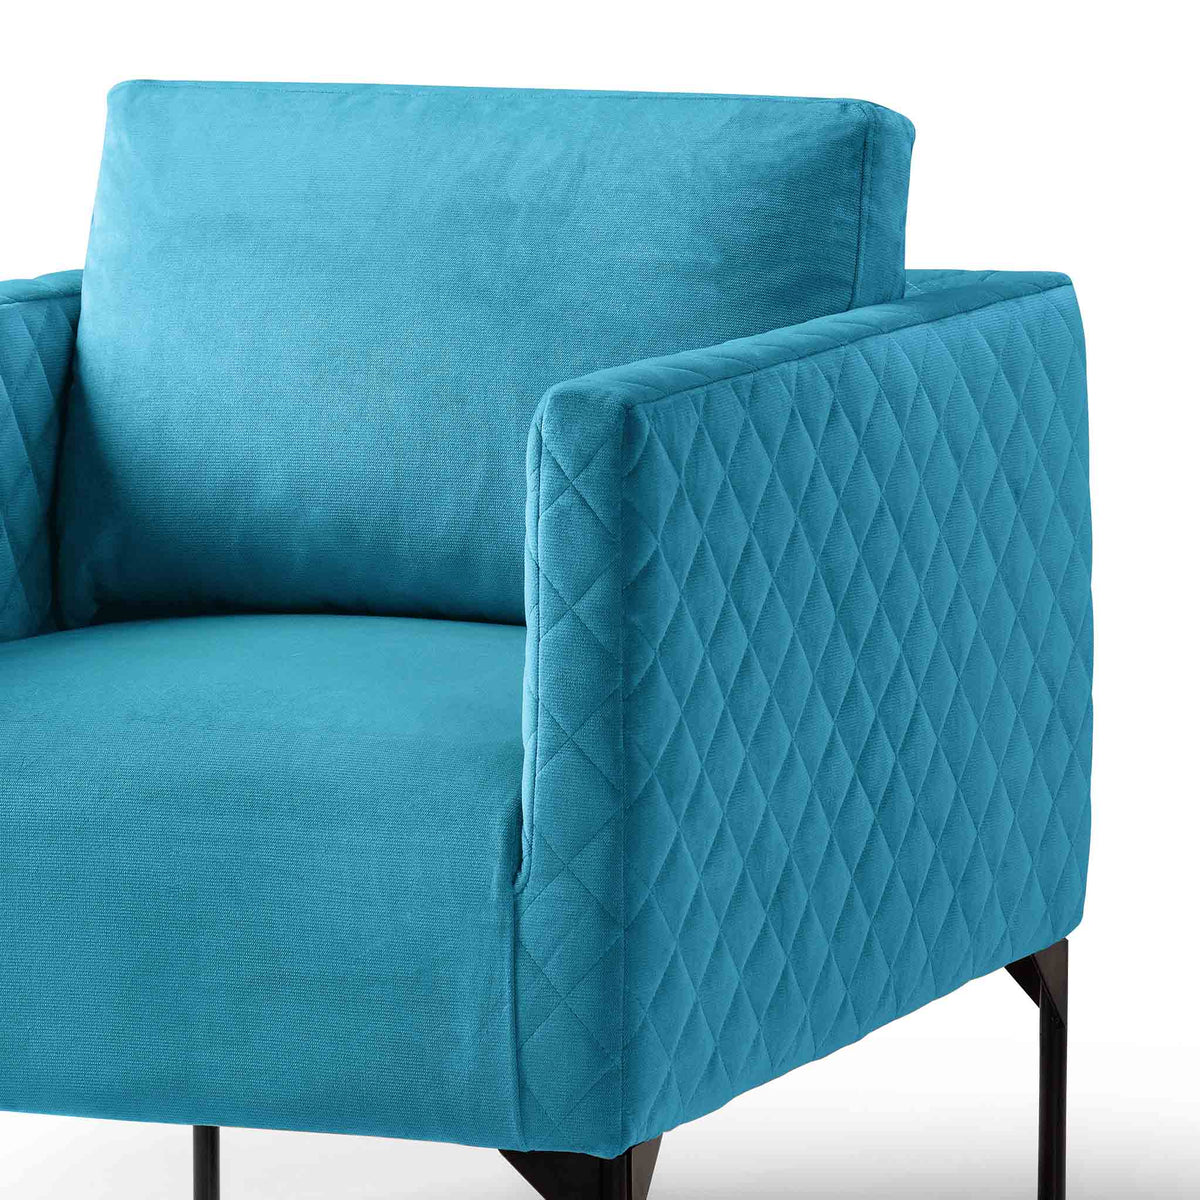 close up of the padded seat and back cushion on the Bali Lagoon Velvet Accent Chair